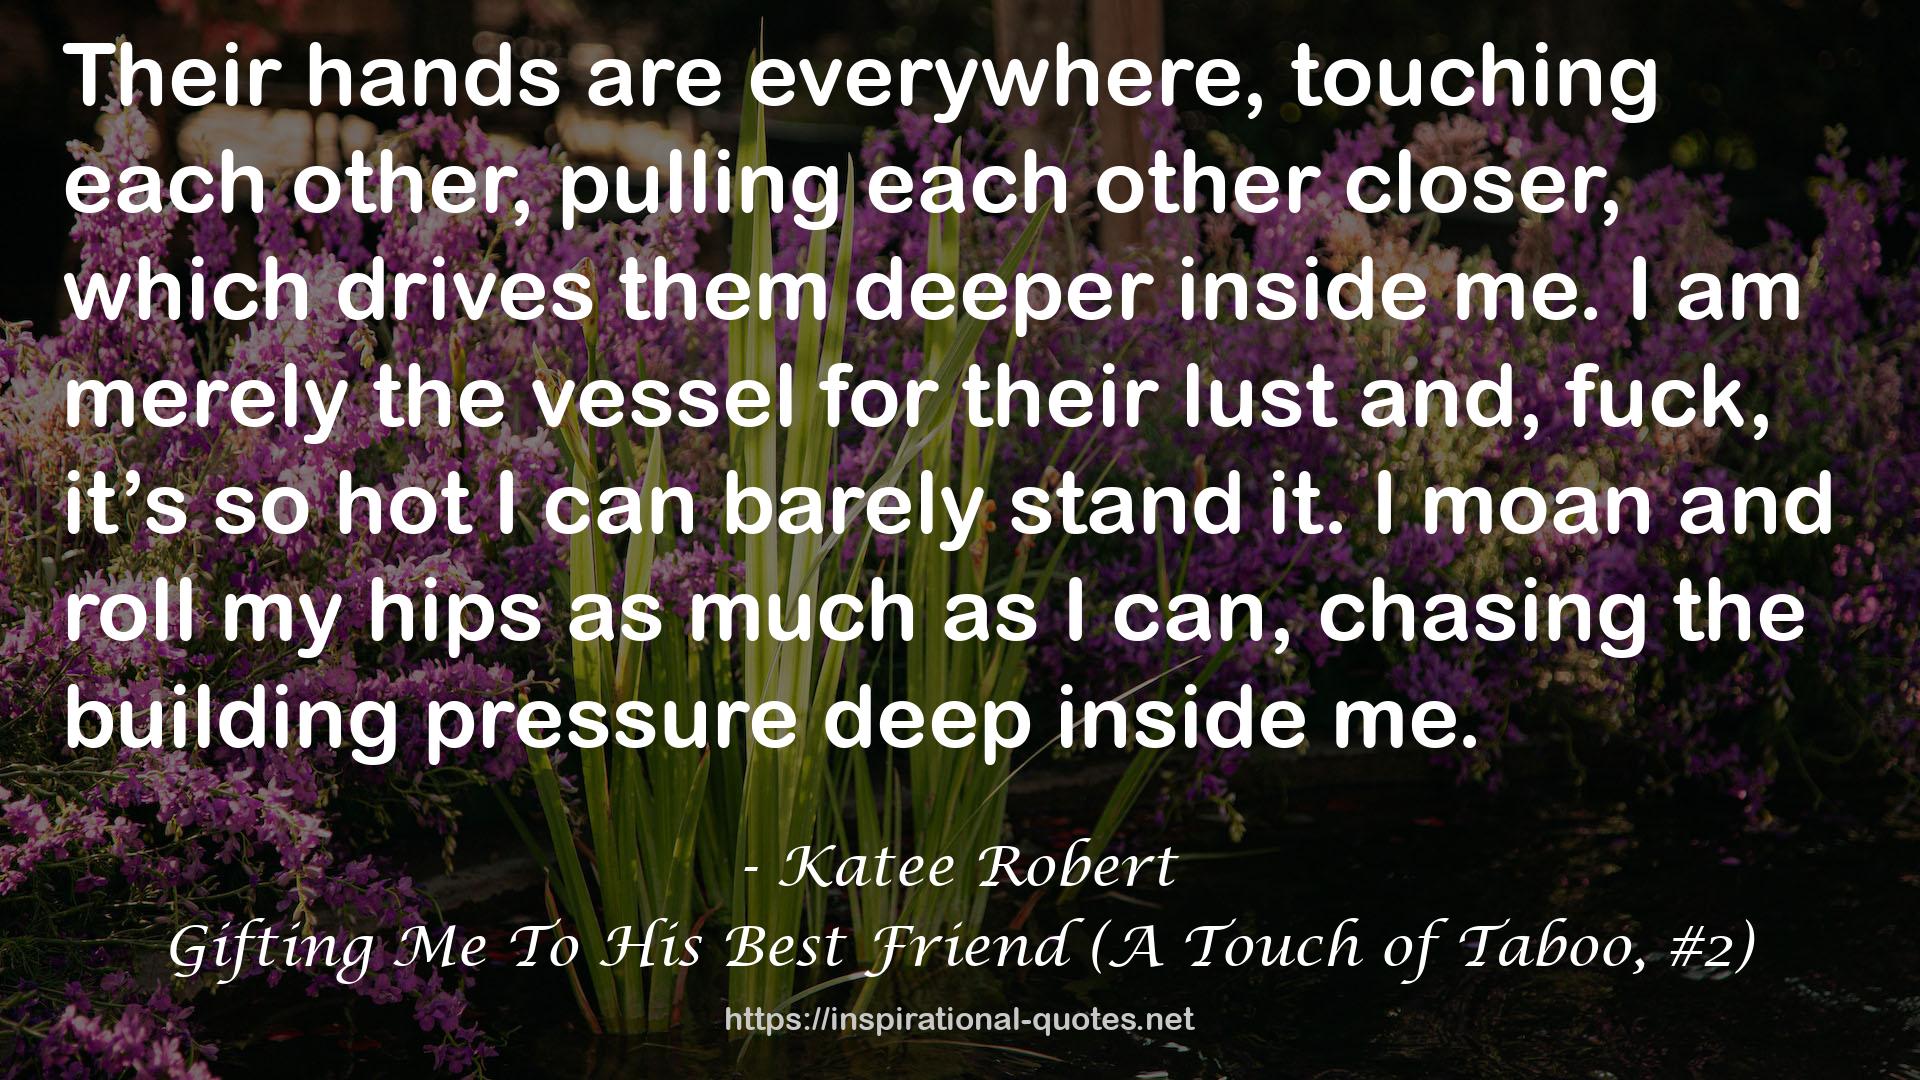 Gifting Me To His Best Friend (A Touch of Taboo, #2) QUOTES